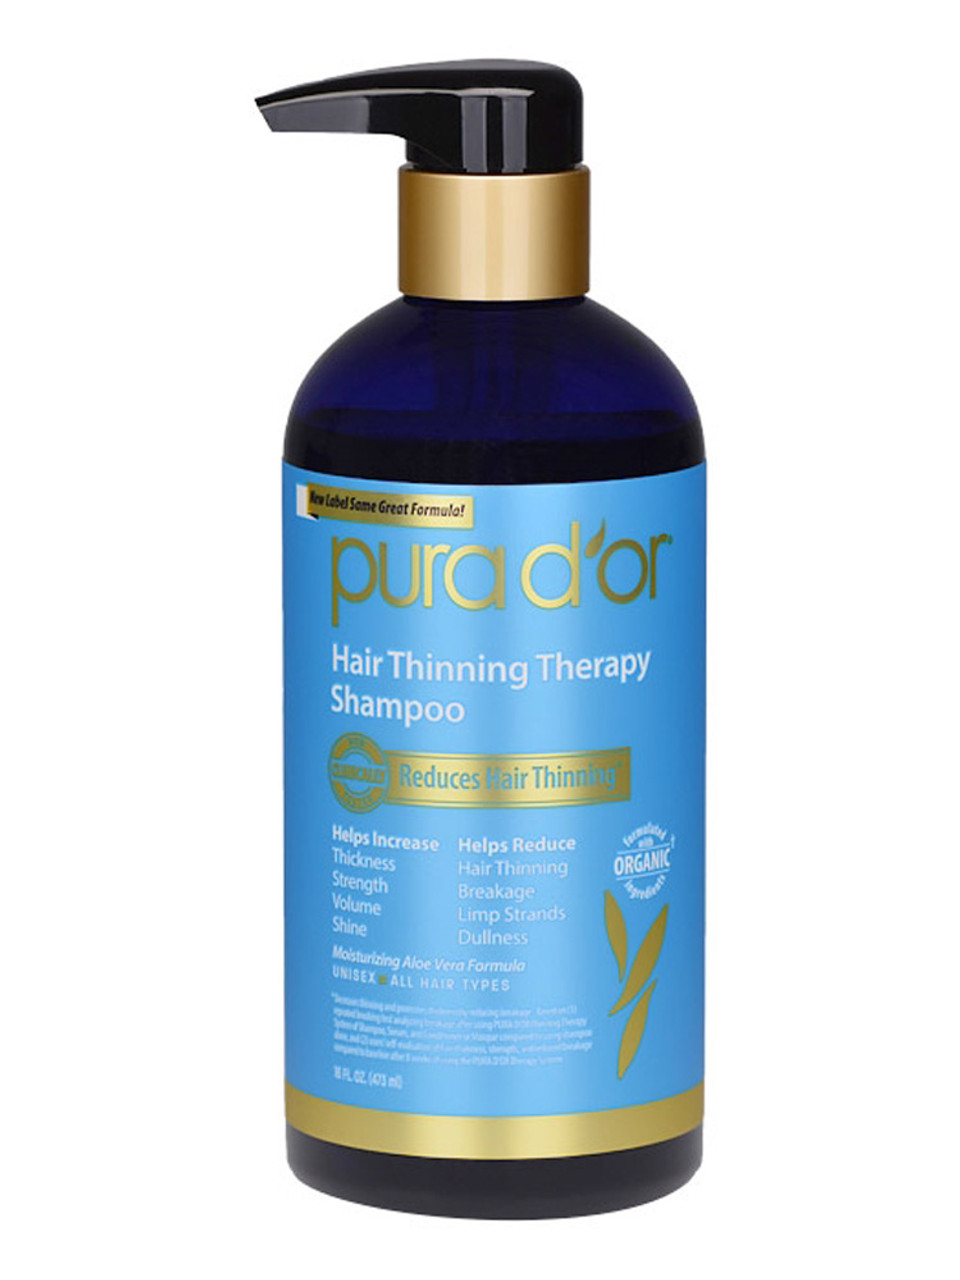 Pura d'or Hair Thinning Therapy Energizing Scalp Serum - 4 fl oz